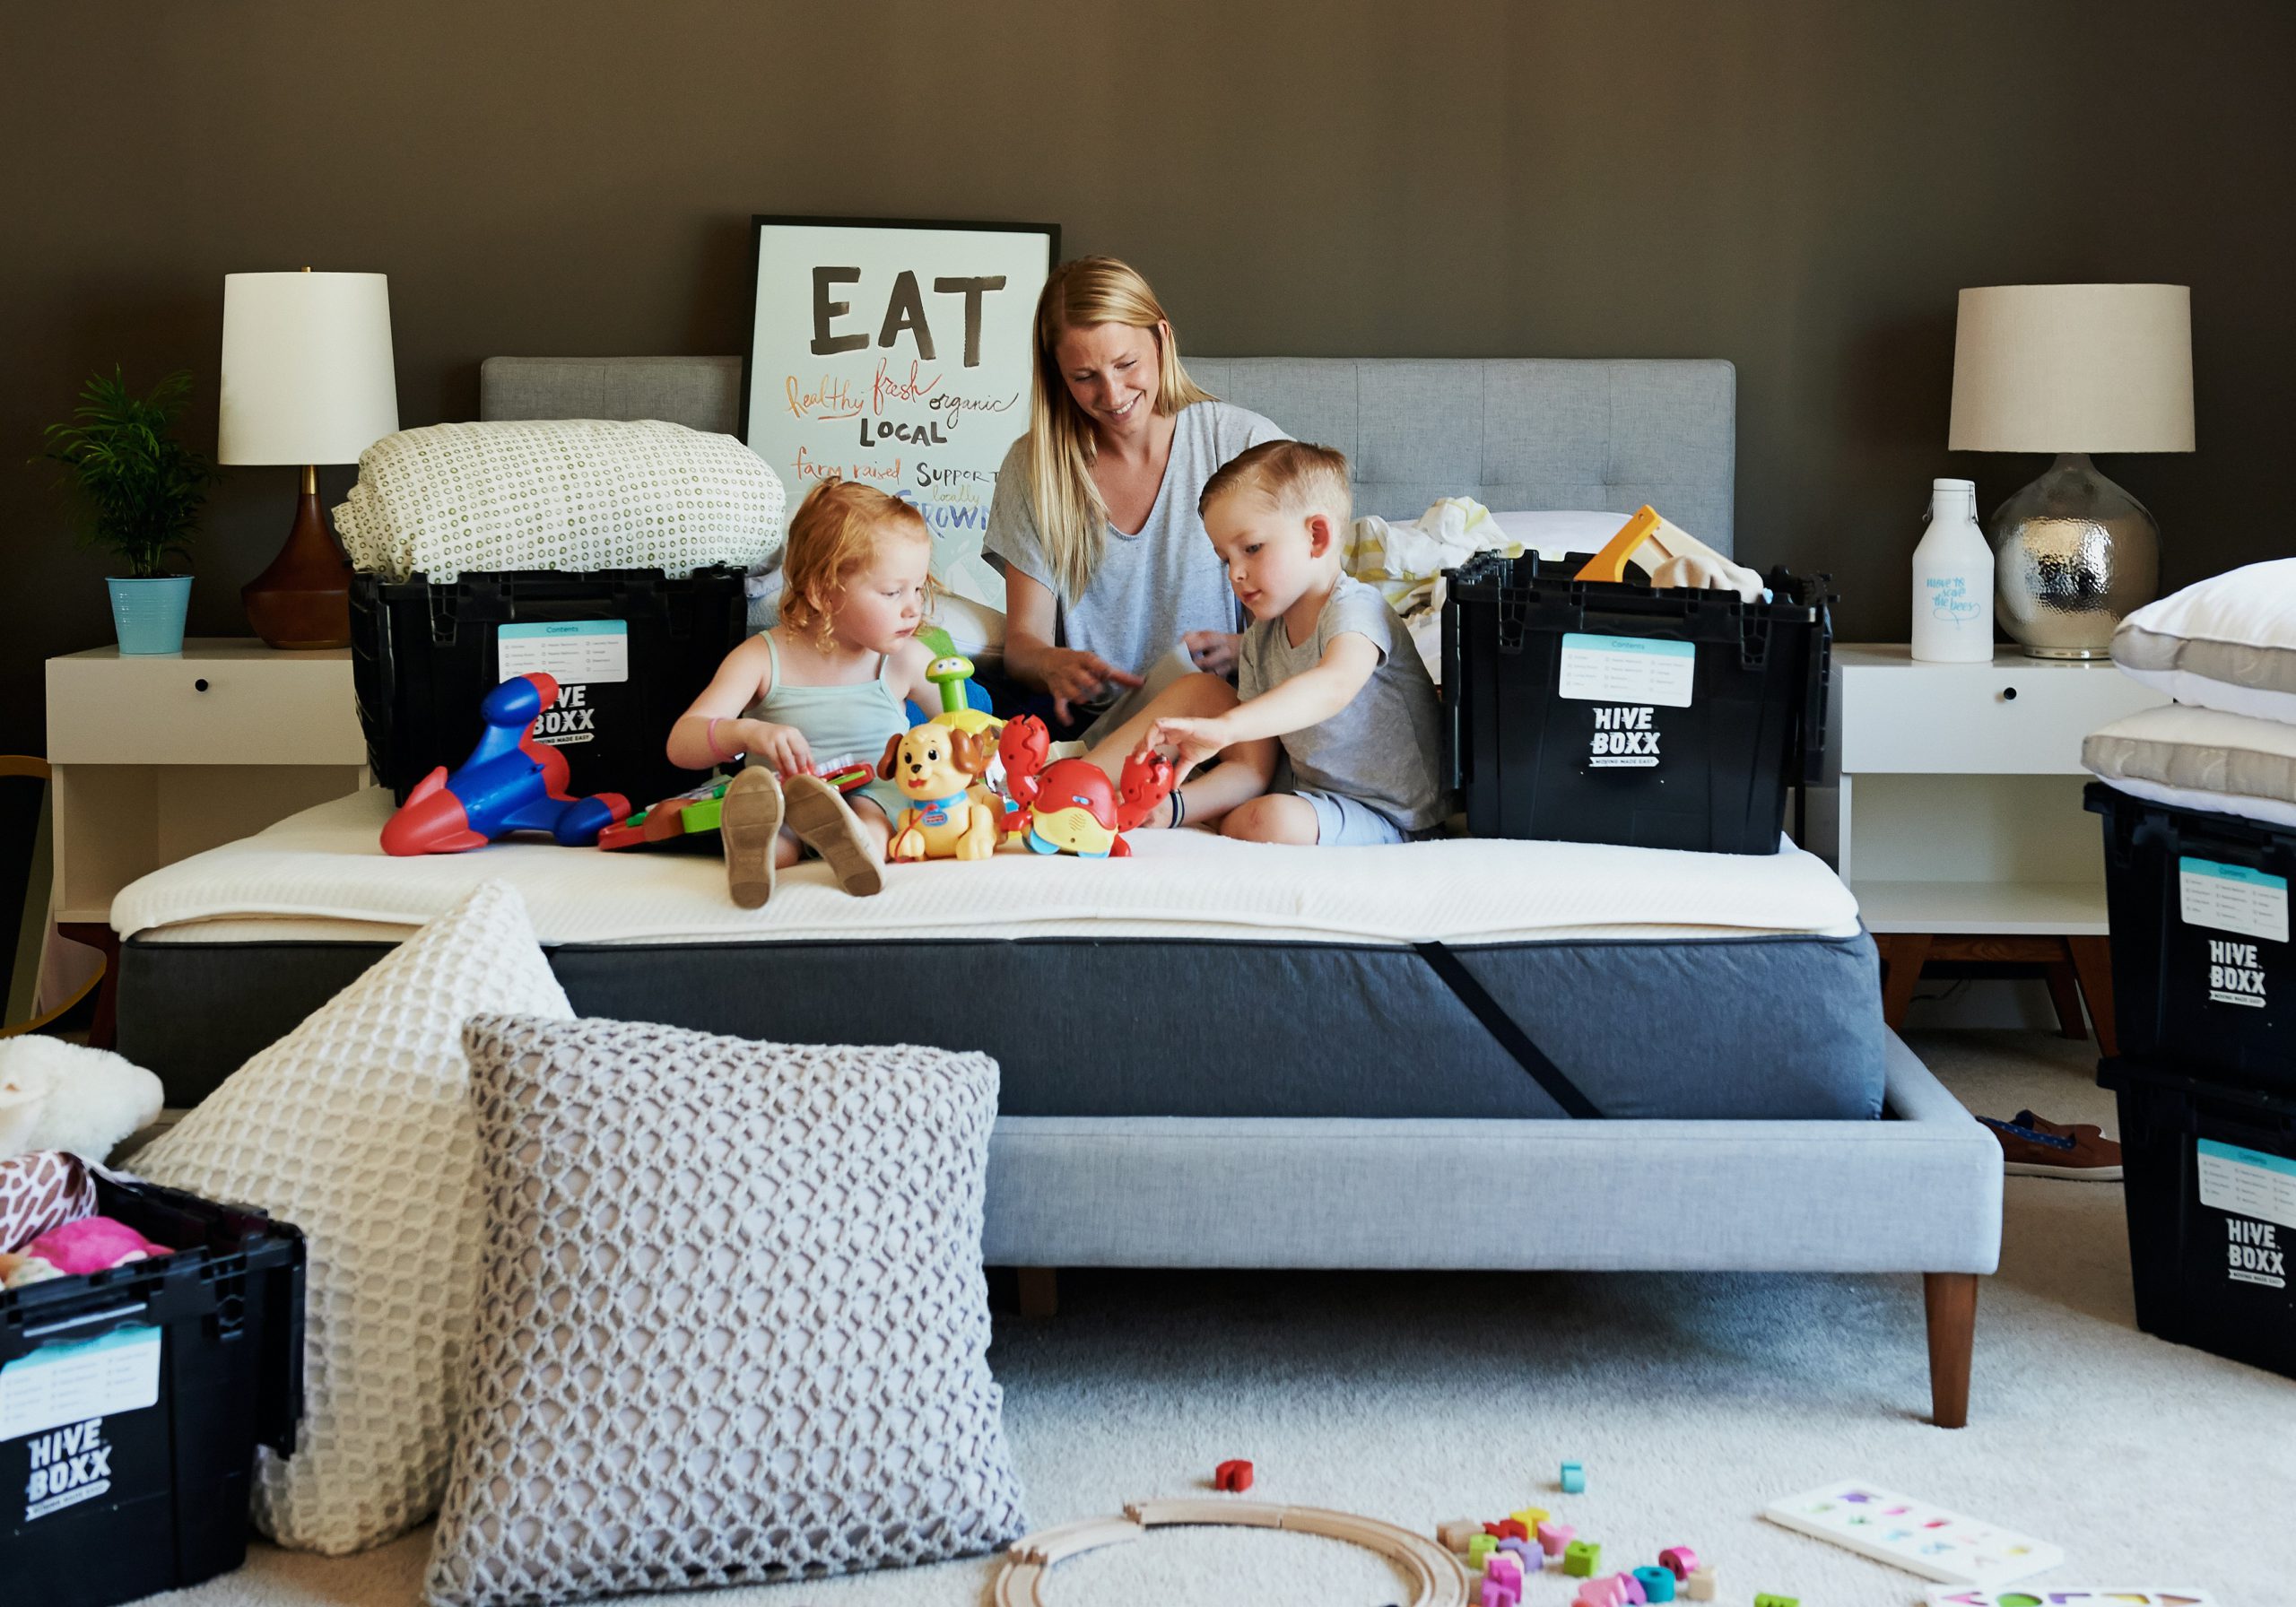 Two children playing with toys on a couch while a parent organizes moving boxes, illustrating family life during moving day.